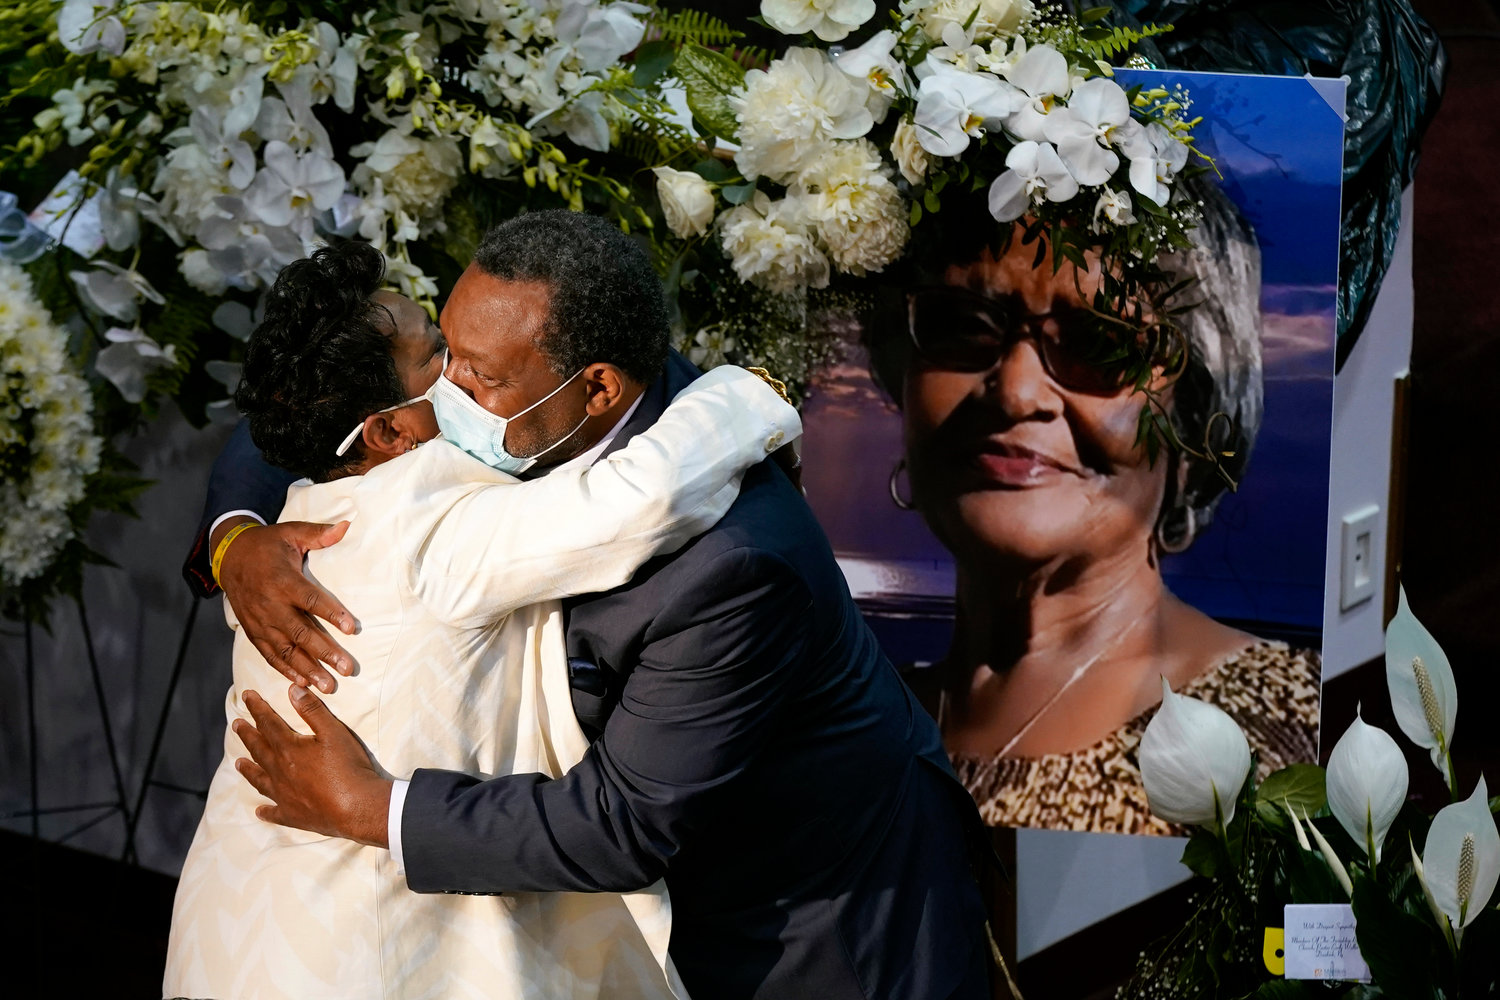 A mourner embraces Angela Crawley, left, daughter of Ruth Whitfield, a victim of the Buffalo supermarket shooting, before a memorial service at Mt. Olive Baptist Church with Vice President Kamala Harris in attendance, Saturday, May 28, 2022, in Buffalo, N.Y. (AP Photo/Patrick Semansky)